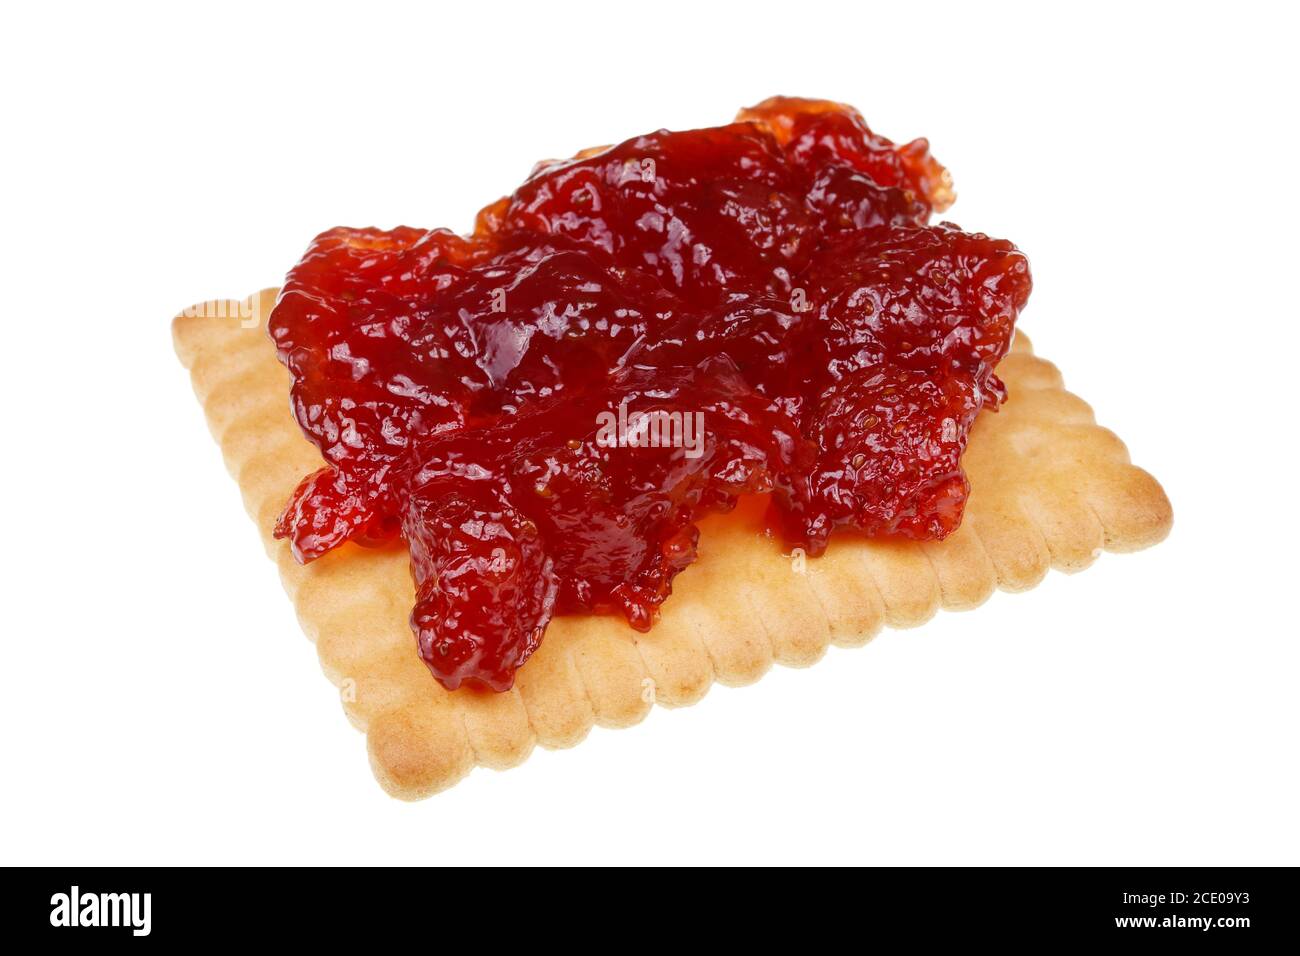 creamy wheat biscuits cookiewith strawberry jam  for a light morning breakfast  isolated macro Stock Photo